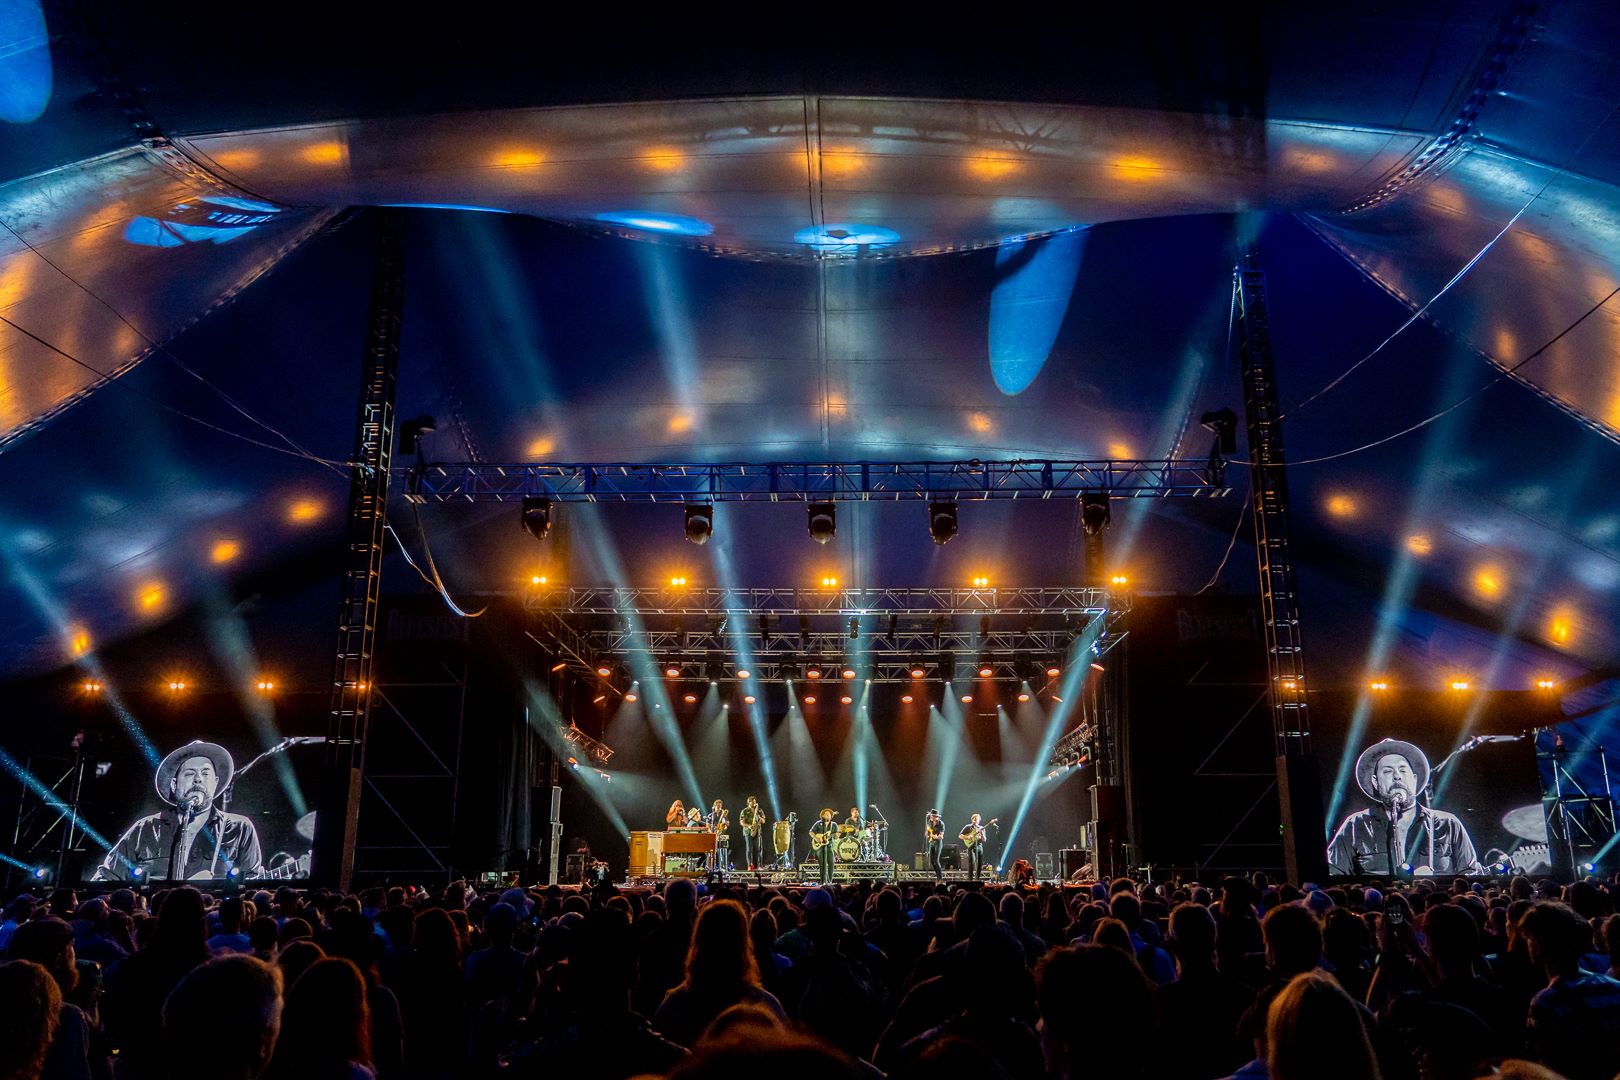 The Brag Media Secures Exclusive Commercialisation Rights With Bluesfest